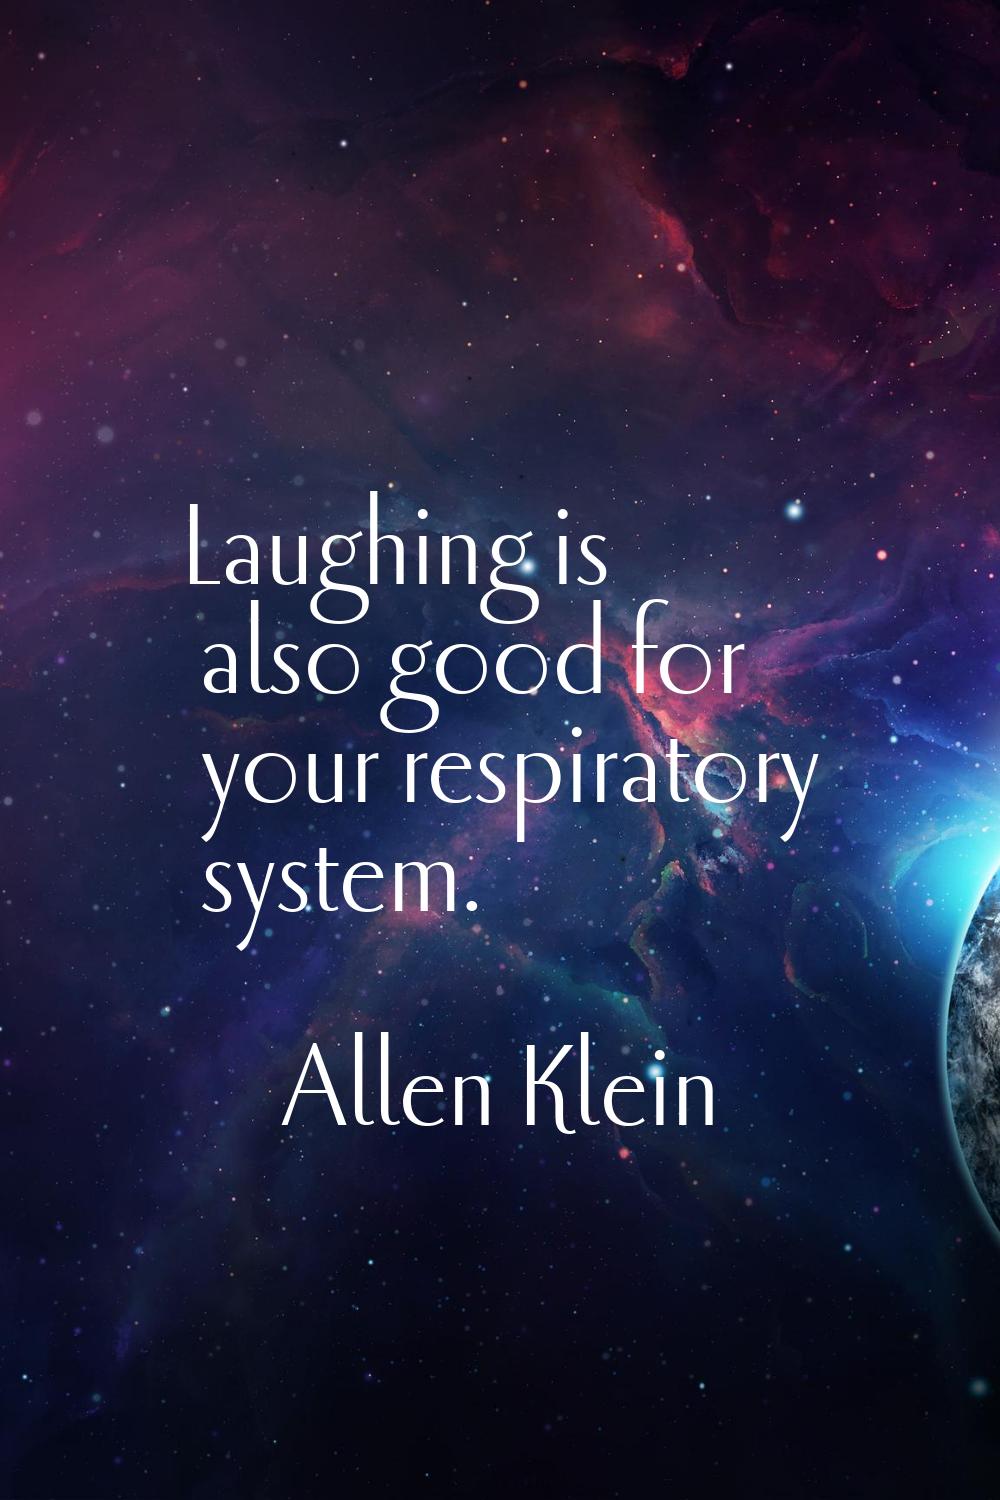 Laughing is also good for your respiratory system.